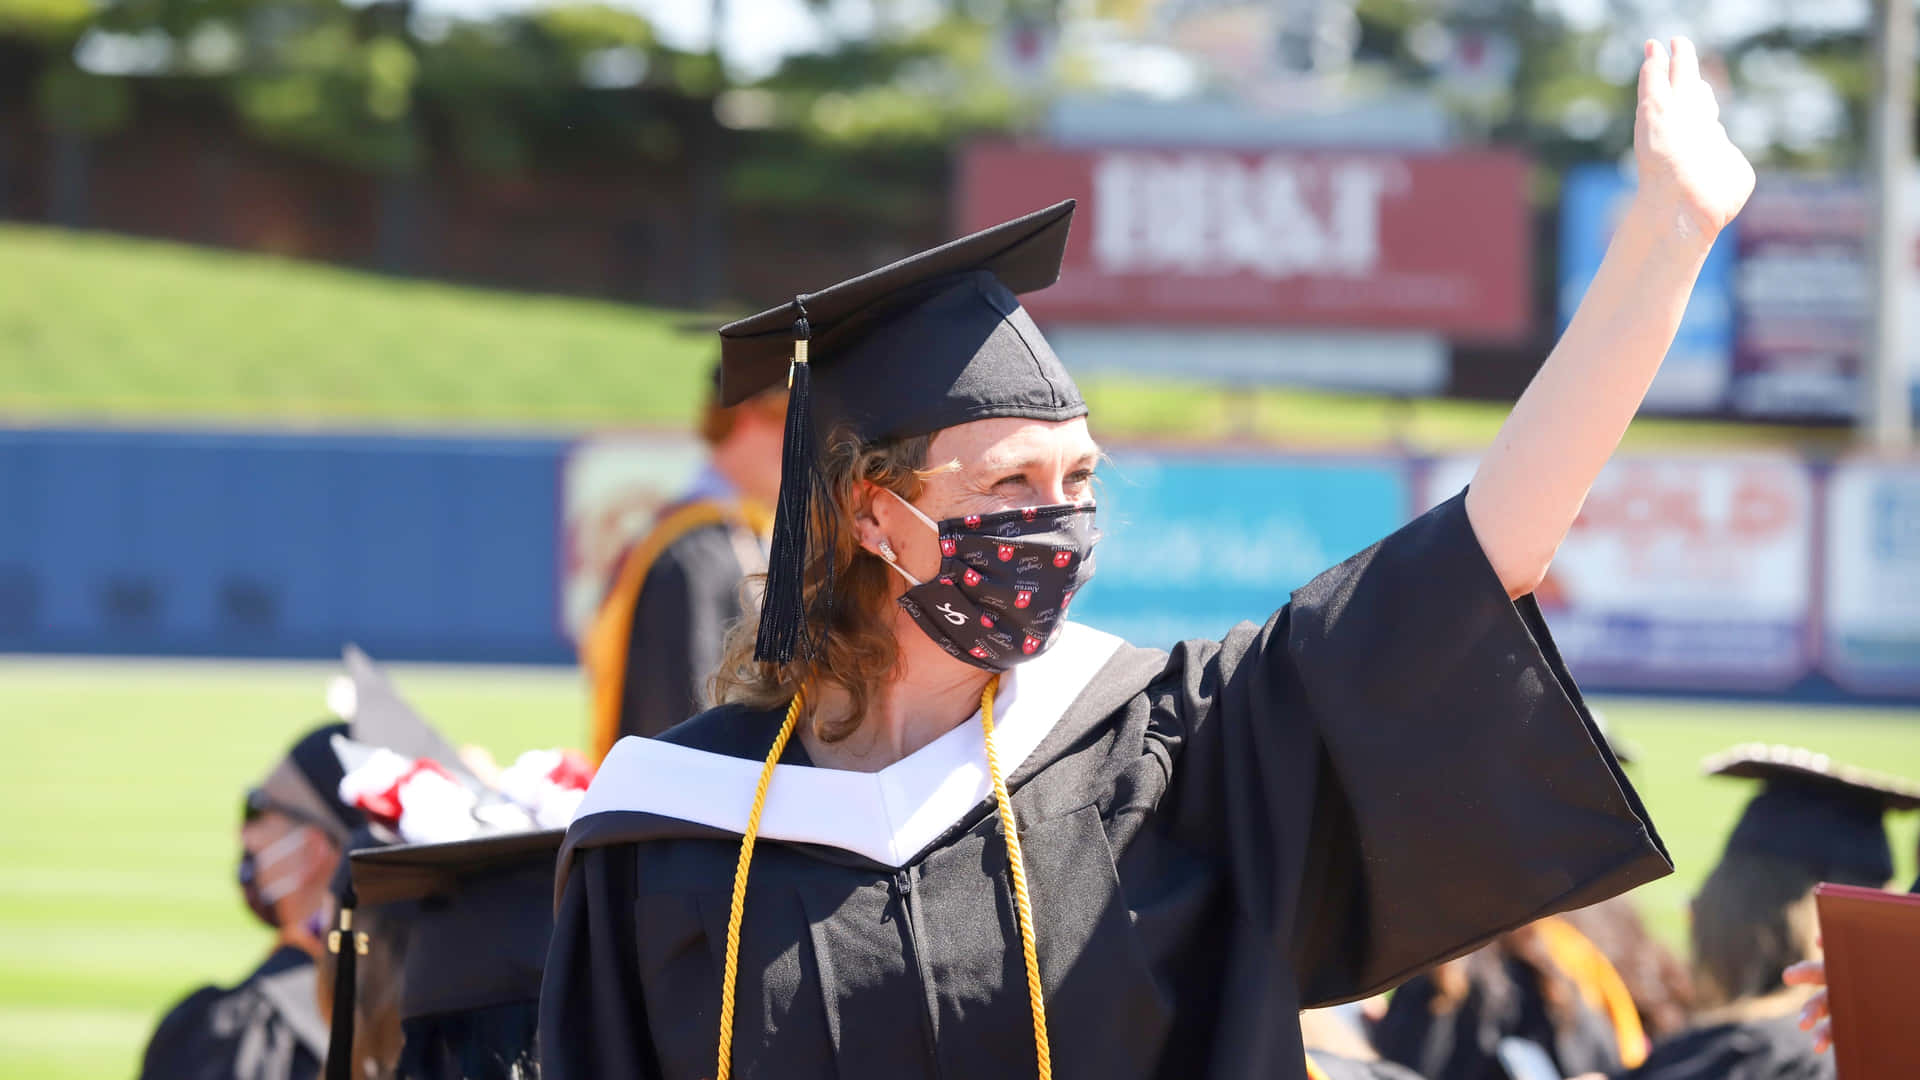 A Woman In Graduation Gown Waves To The Crowd